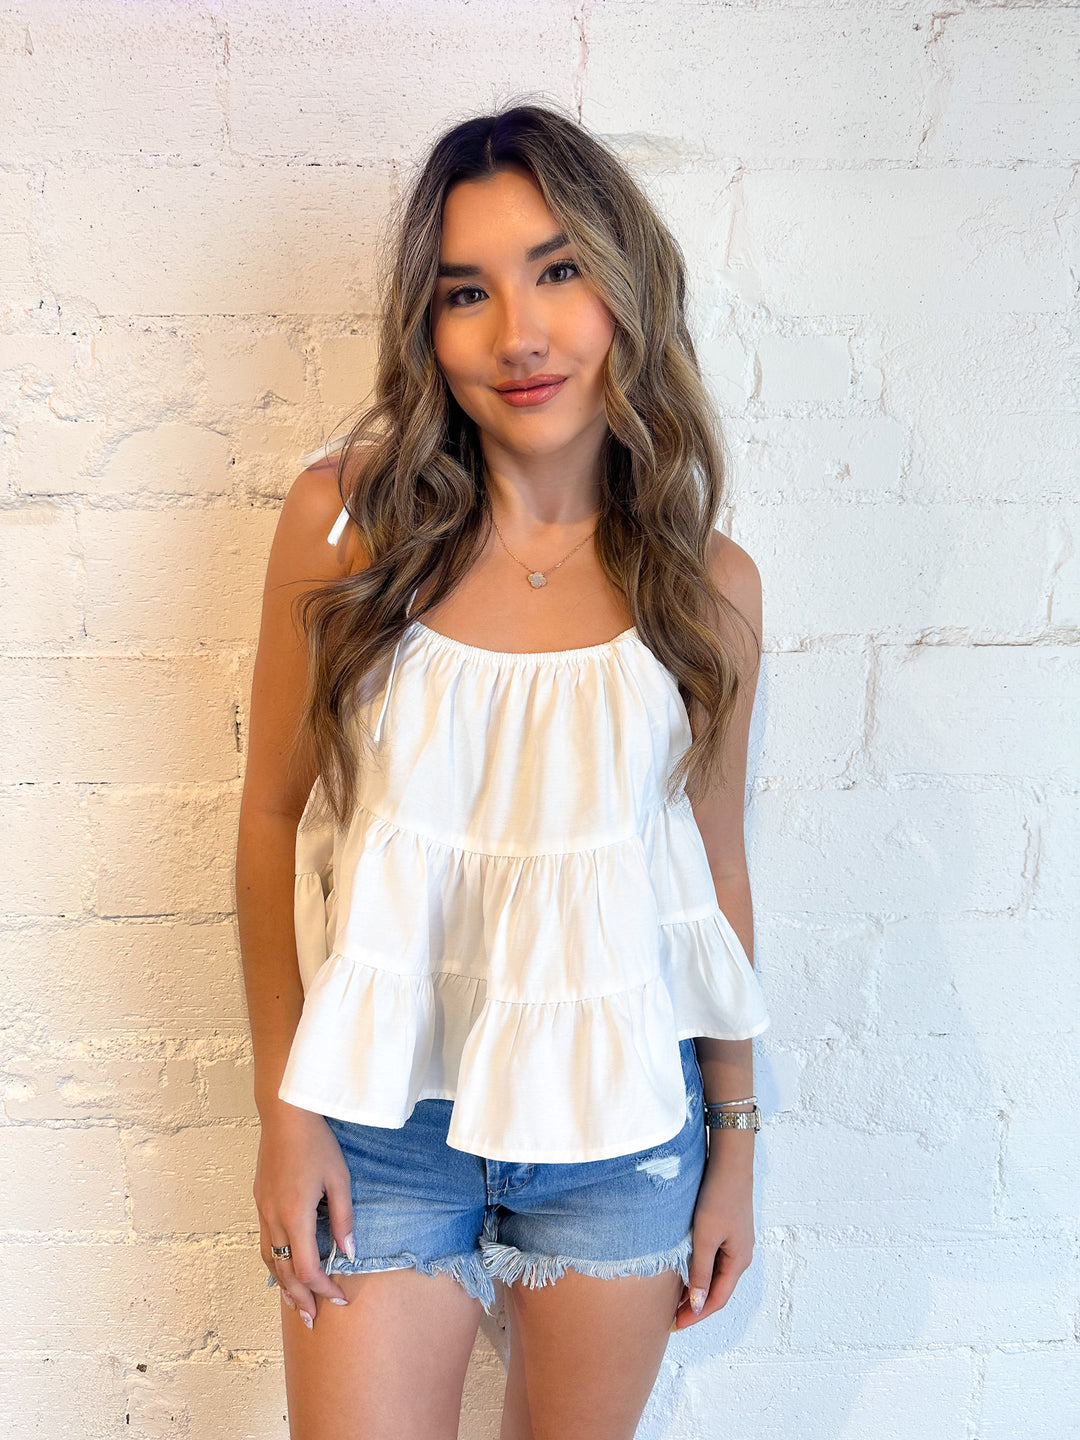 Tessa Tiered Top, Tops, Adeline, Adeline, dallas boutique, dallas texas, texas boutique, women's boutique dallas, adeline boutique, dallas boutique, trendy boutique, affordable boutique